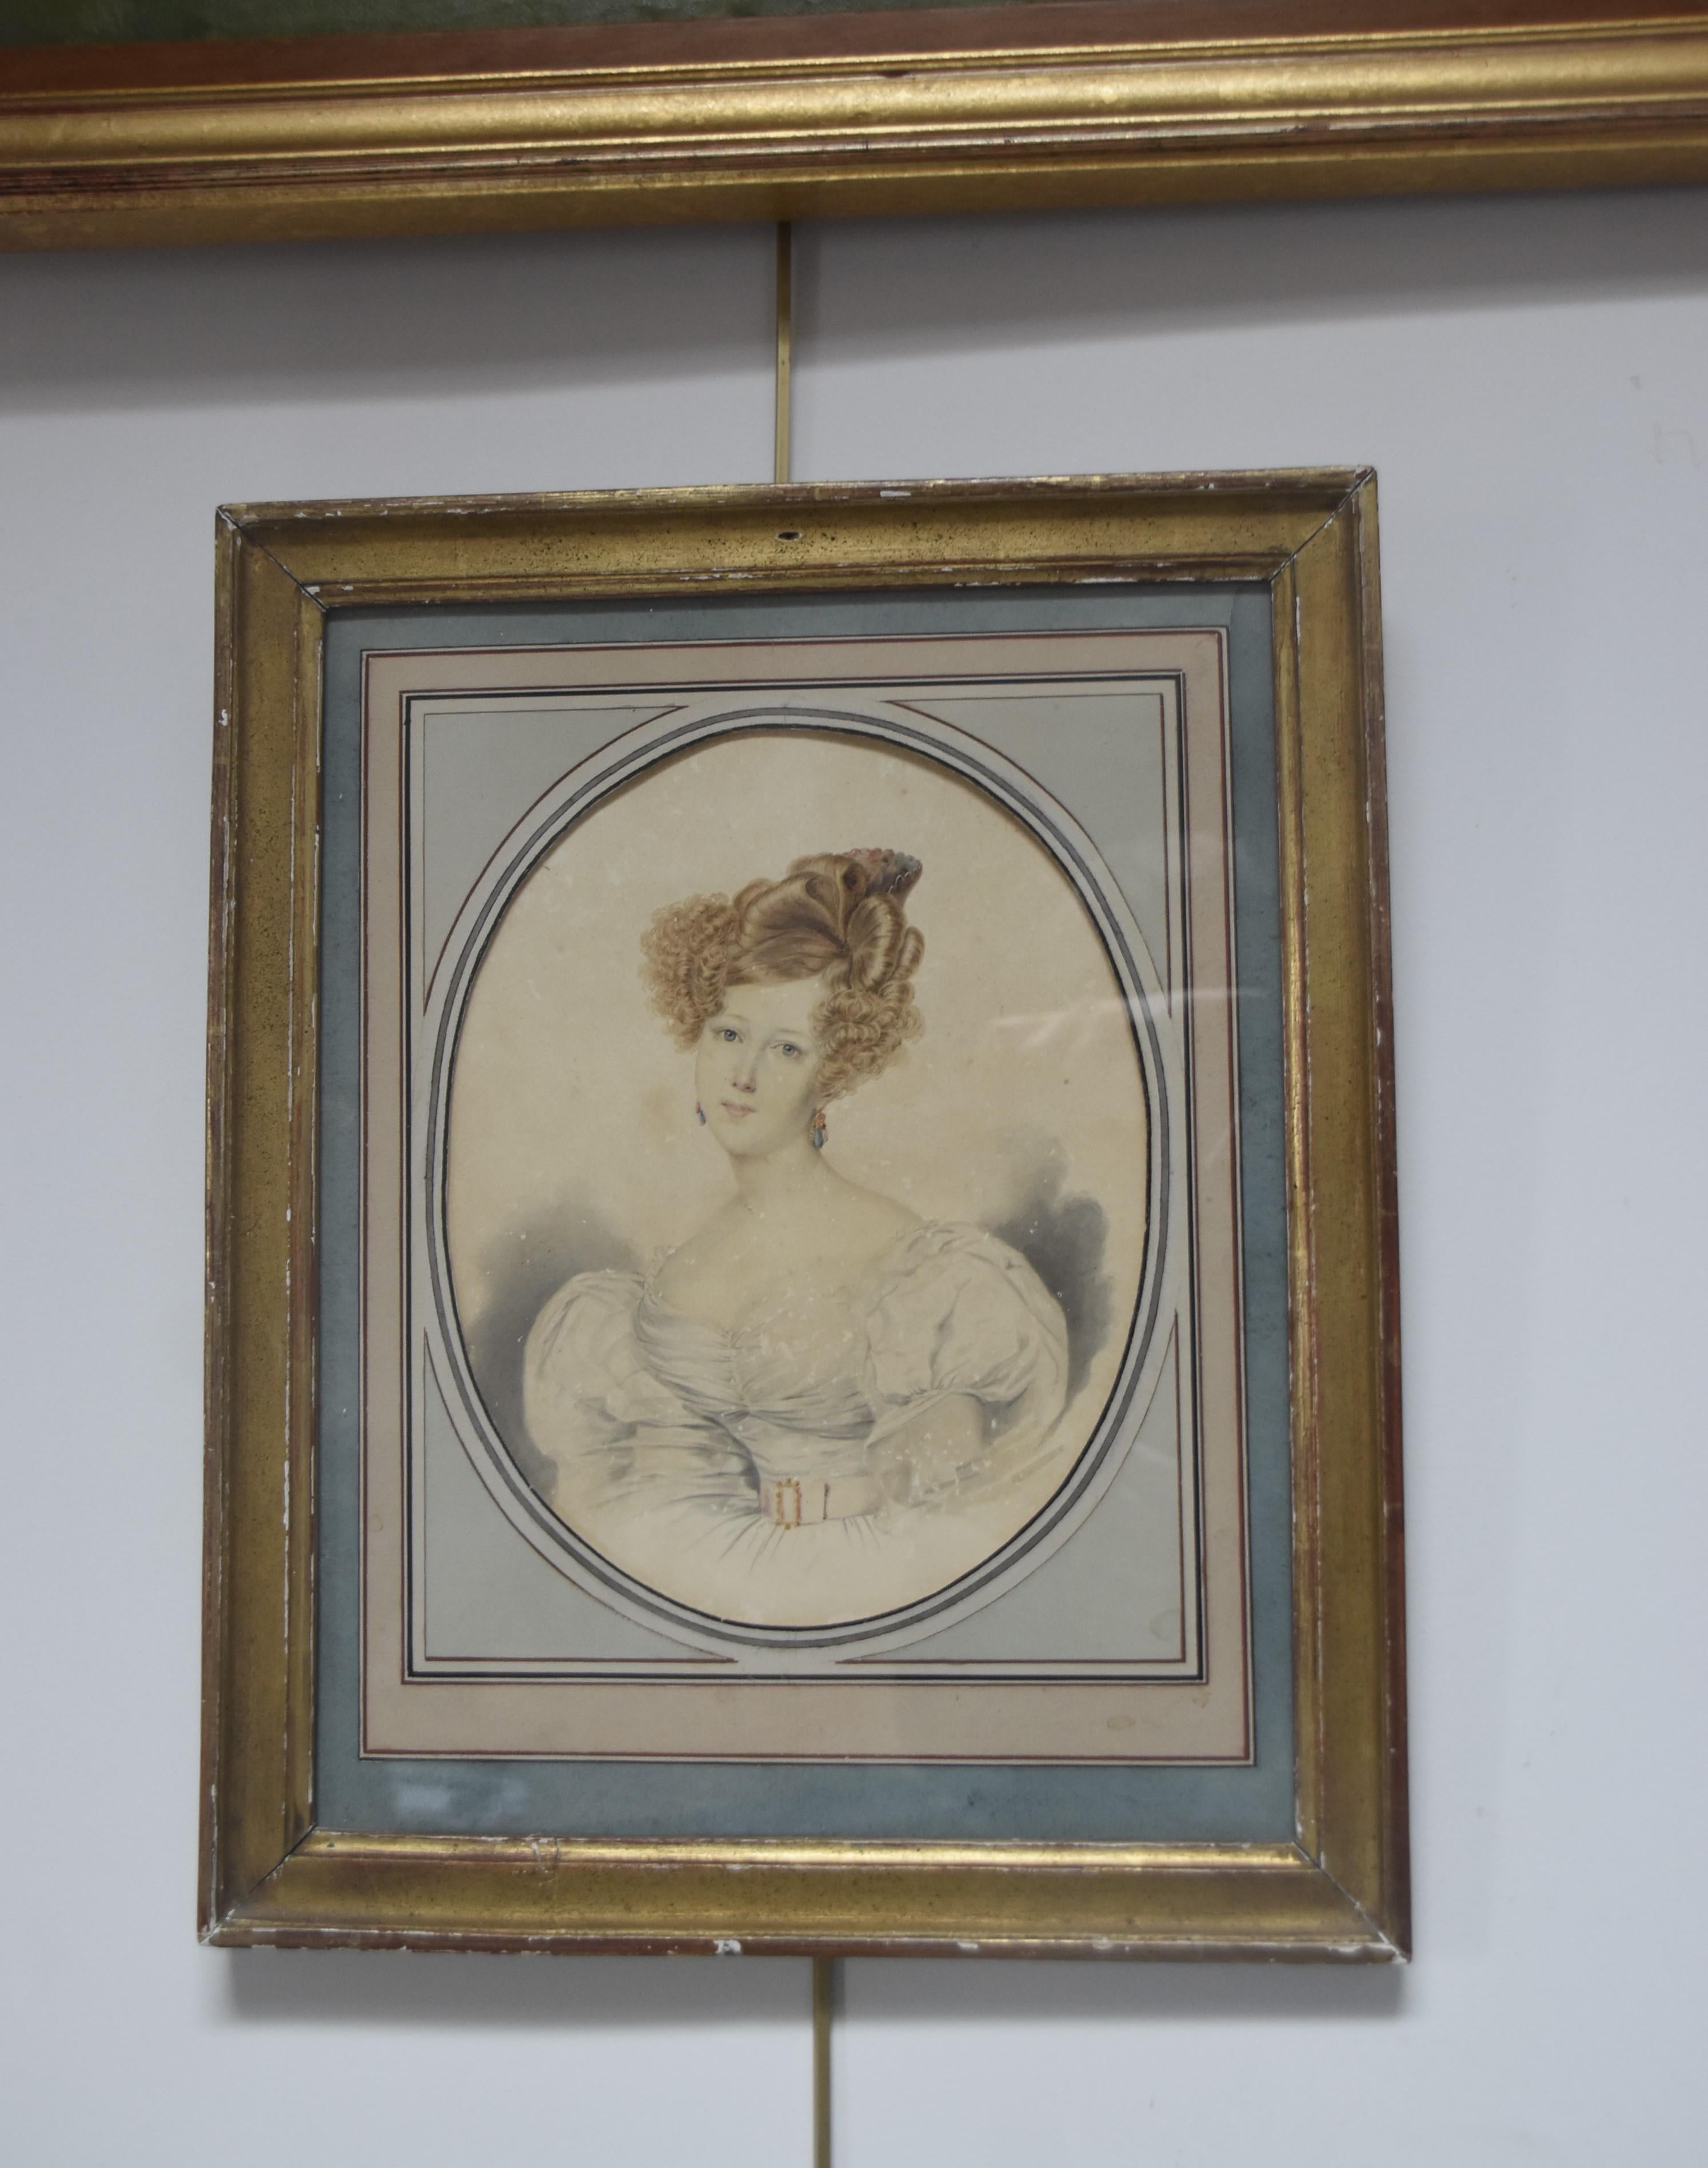 French school circa 1840
Portrait of a Lady
watercolor on Bristol paper
25.5 x 20 cm oval
in quite good condition : slightly yellowed by time, multiple little scratches, stains (see photographs please)
In a vintage frame : 41.5 x 33.5 cm multiple